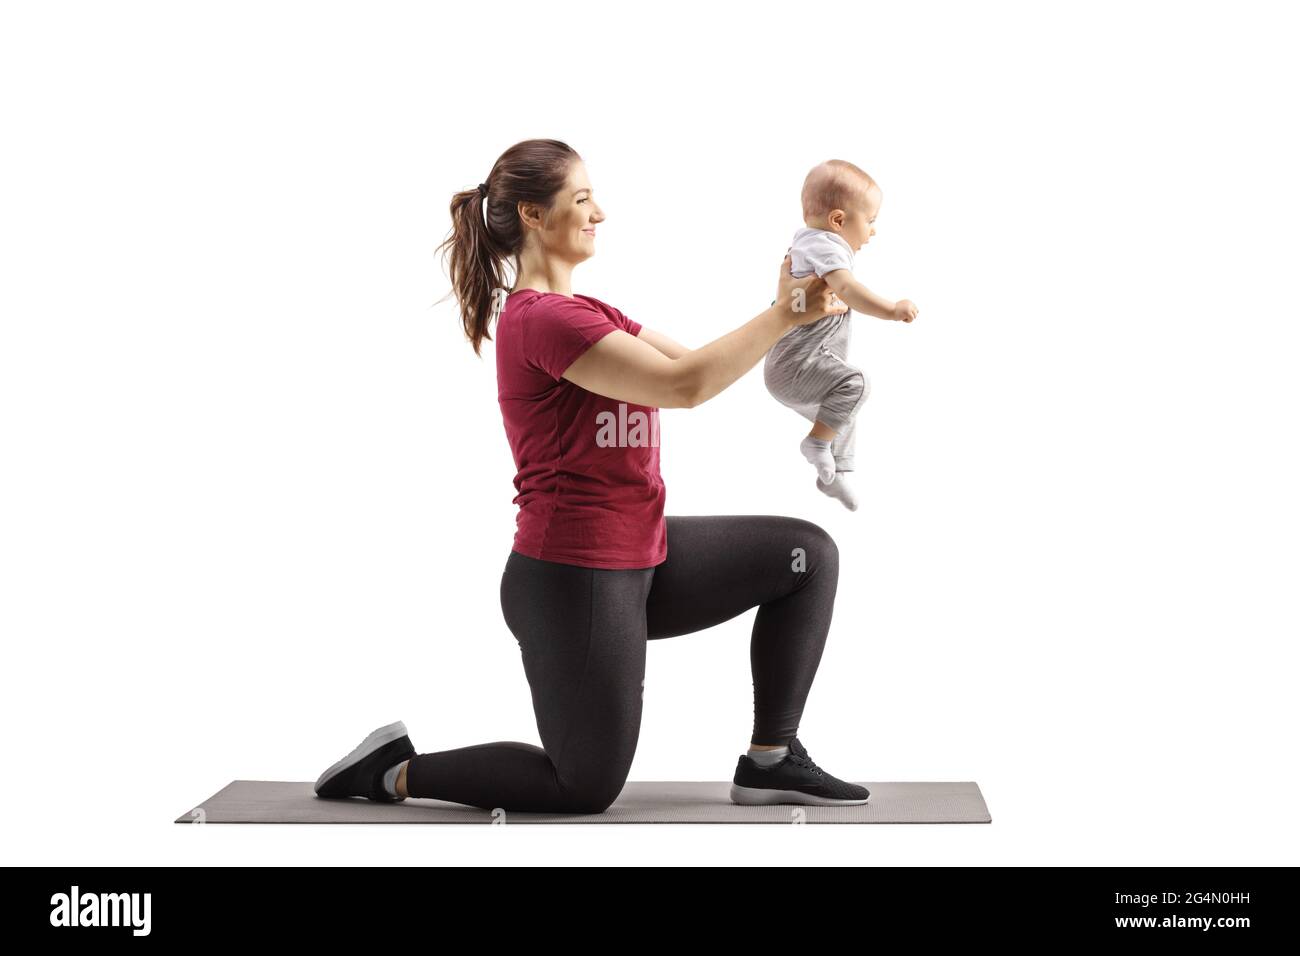 Young mother kneeling on an exercise mat and holding her baby isolated on white background Stock Photo